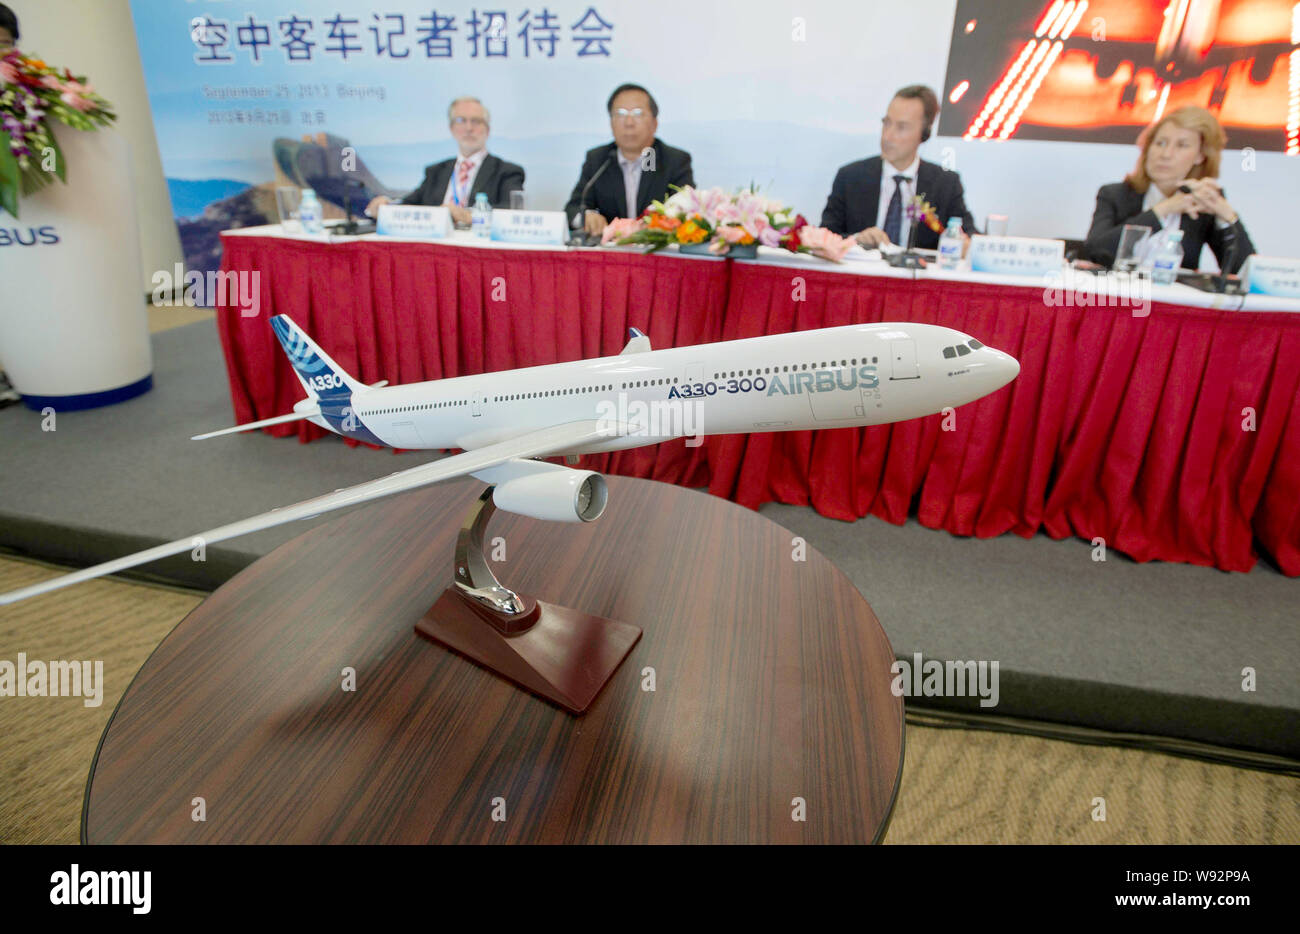 A model plane of the short-range regional version of Airbus A330-300 is displayed at a press conference during the Aviation Expo/China 2013 in Beijing Stock Photo